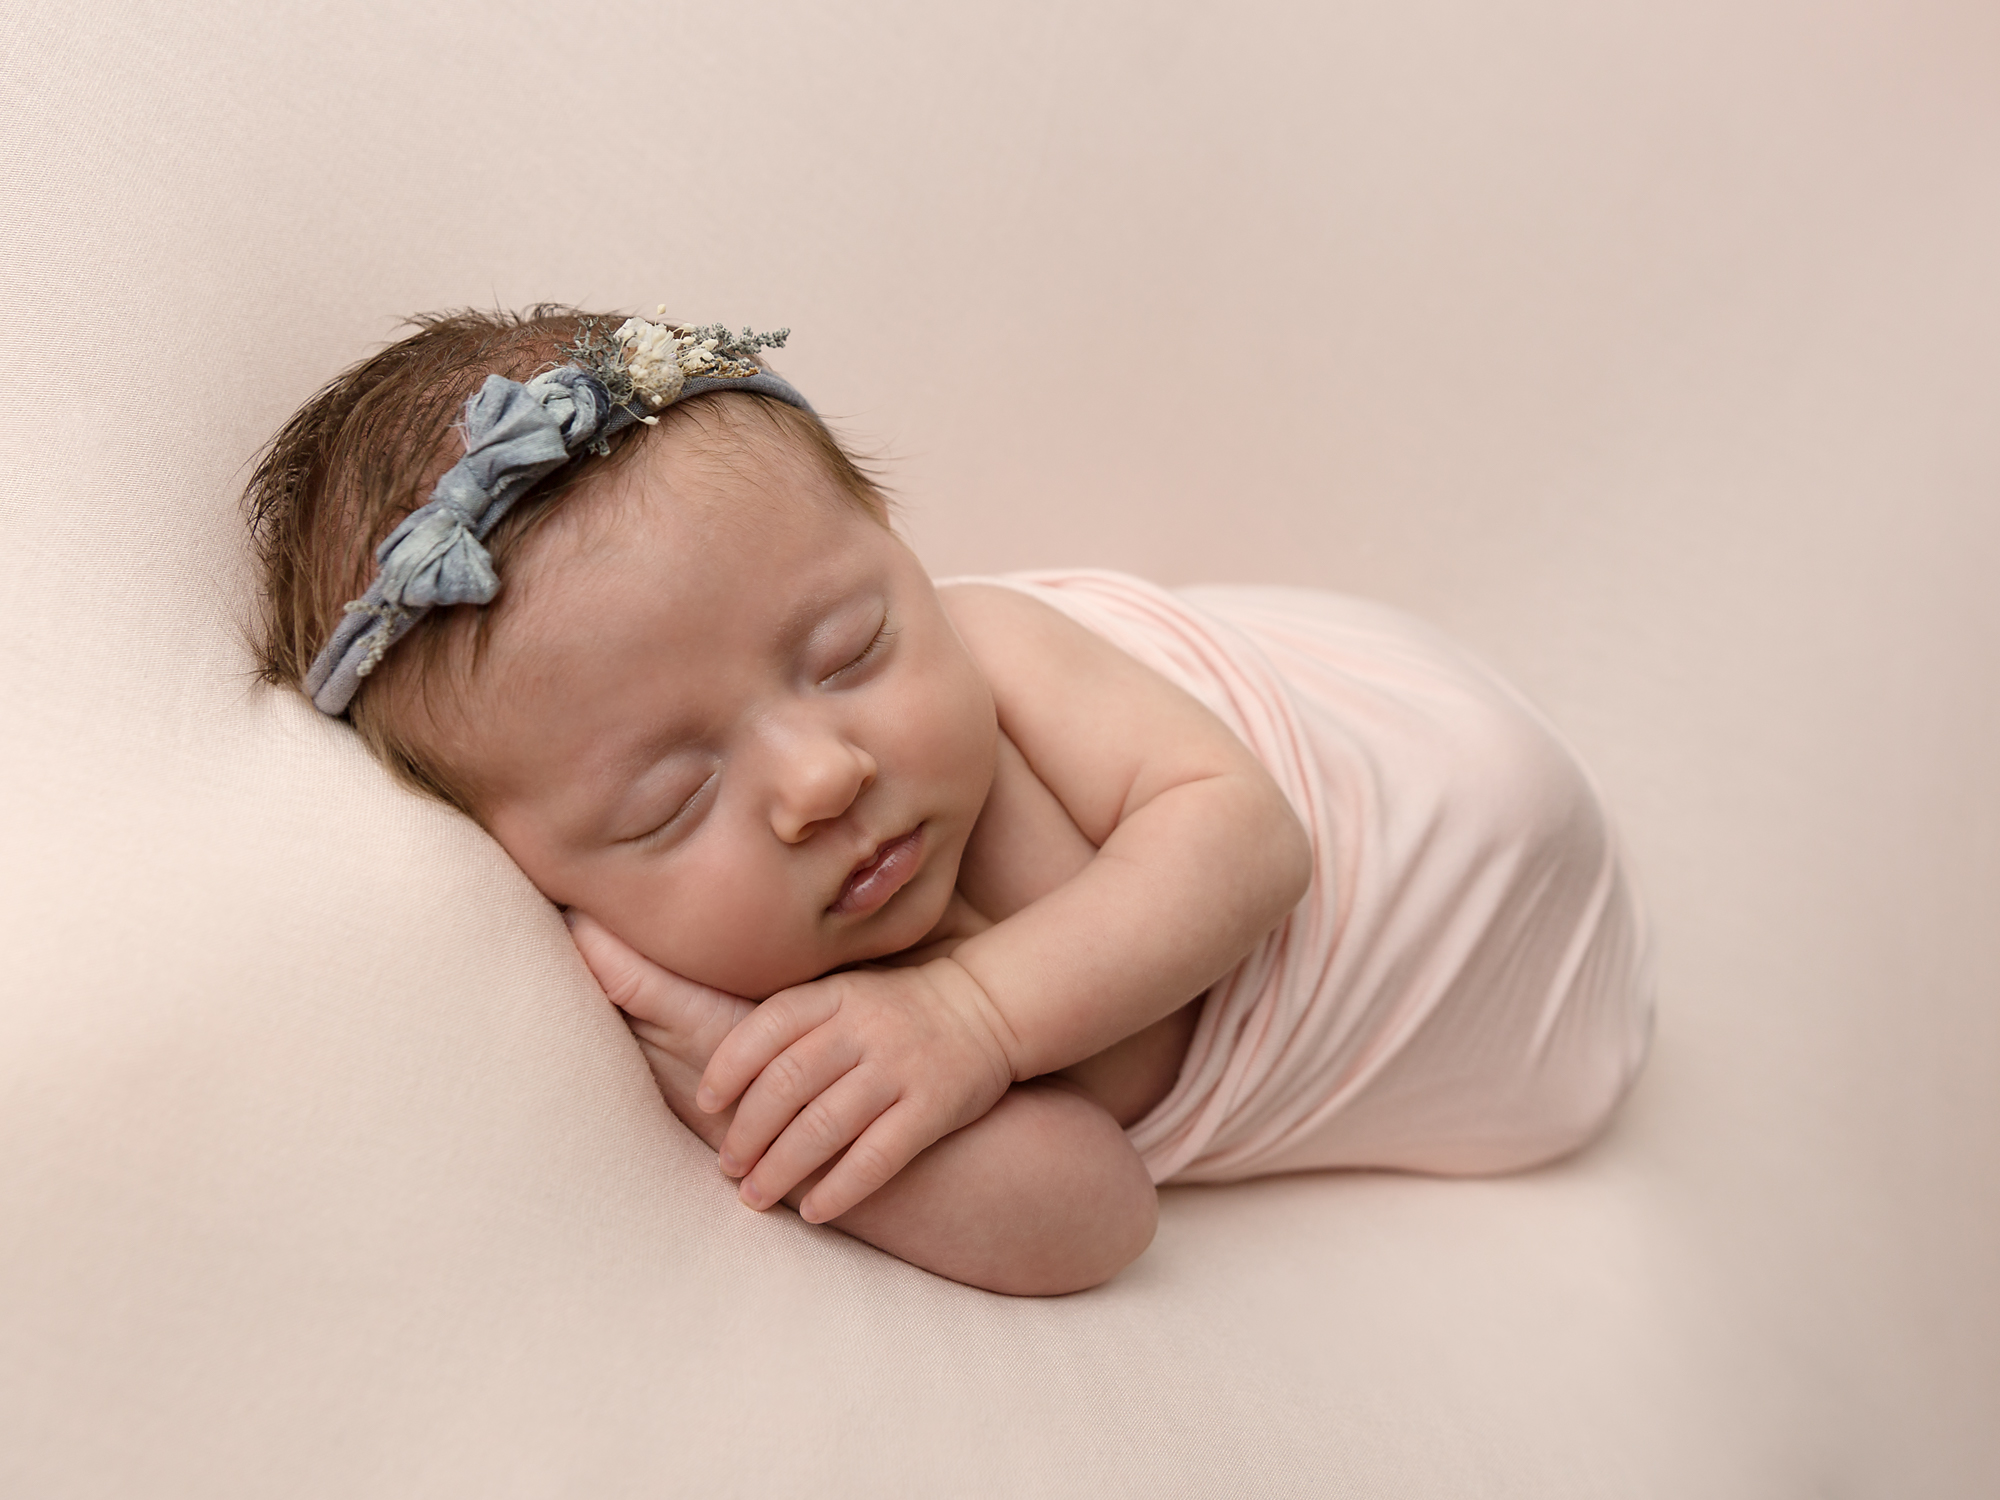 baby and newborn photographer in caerphilly, cardiff, south wales